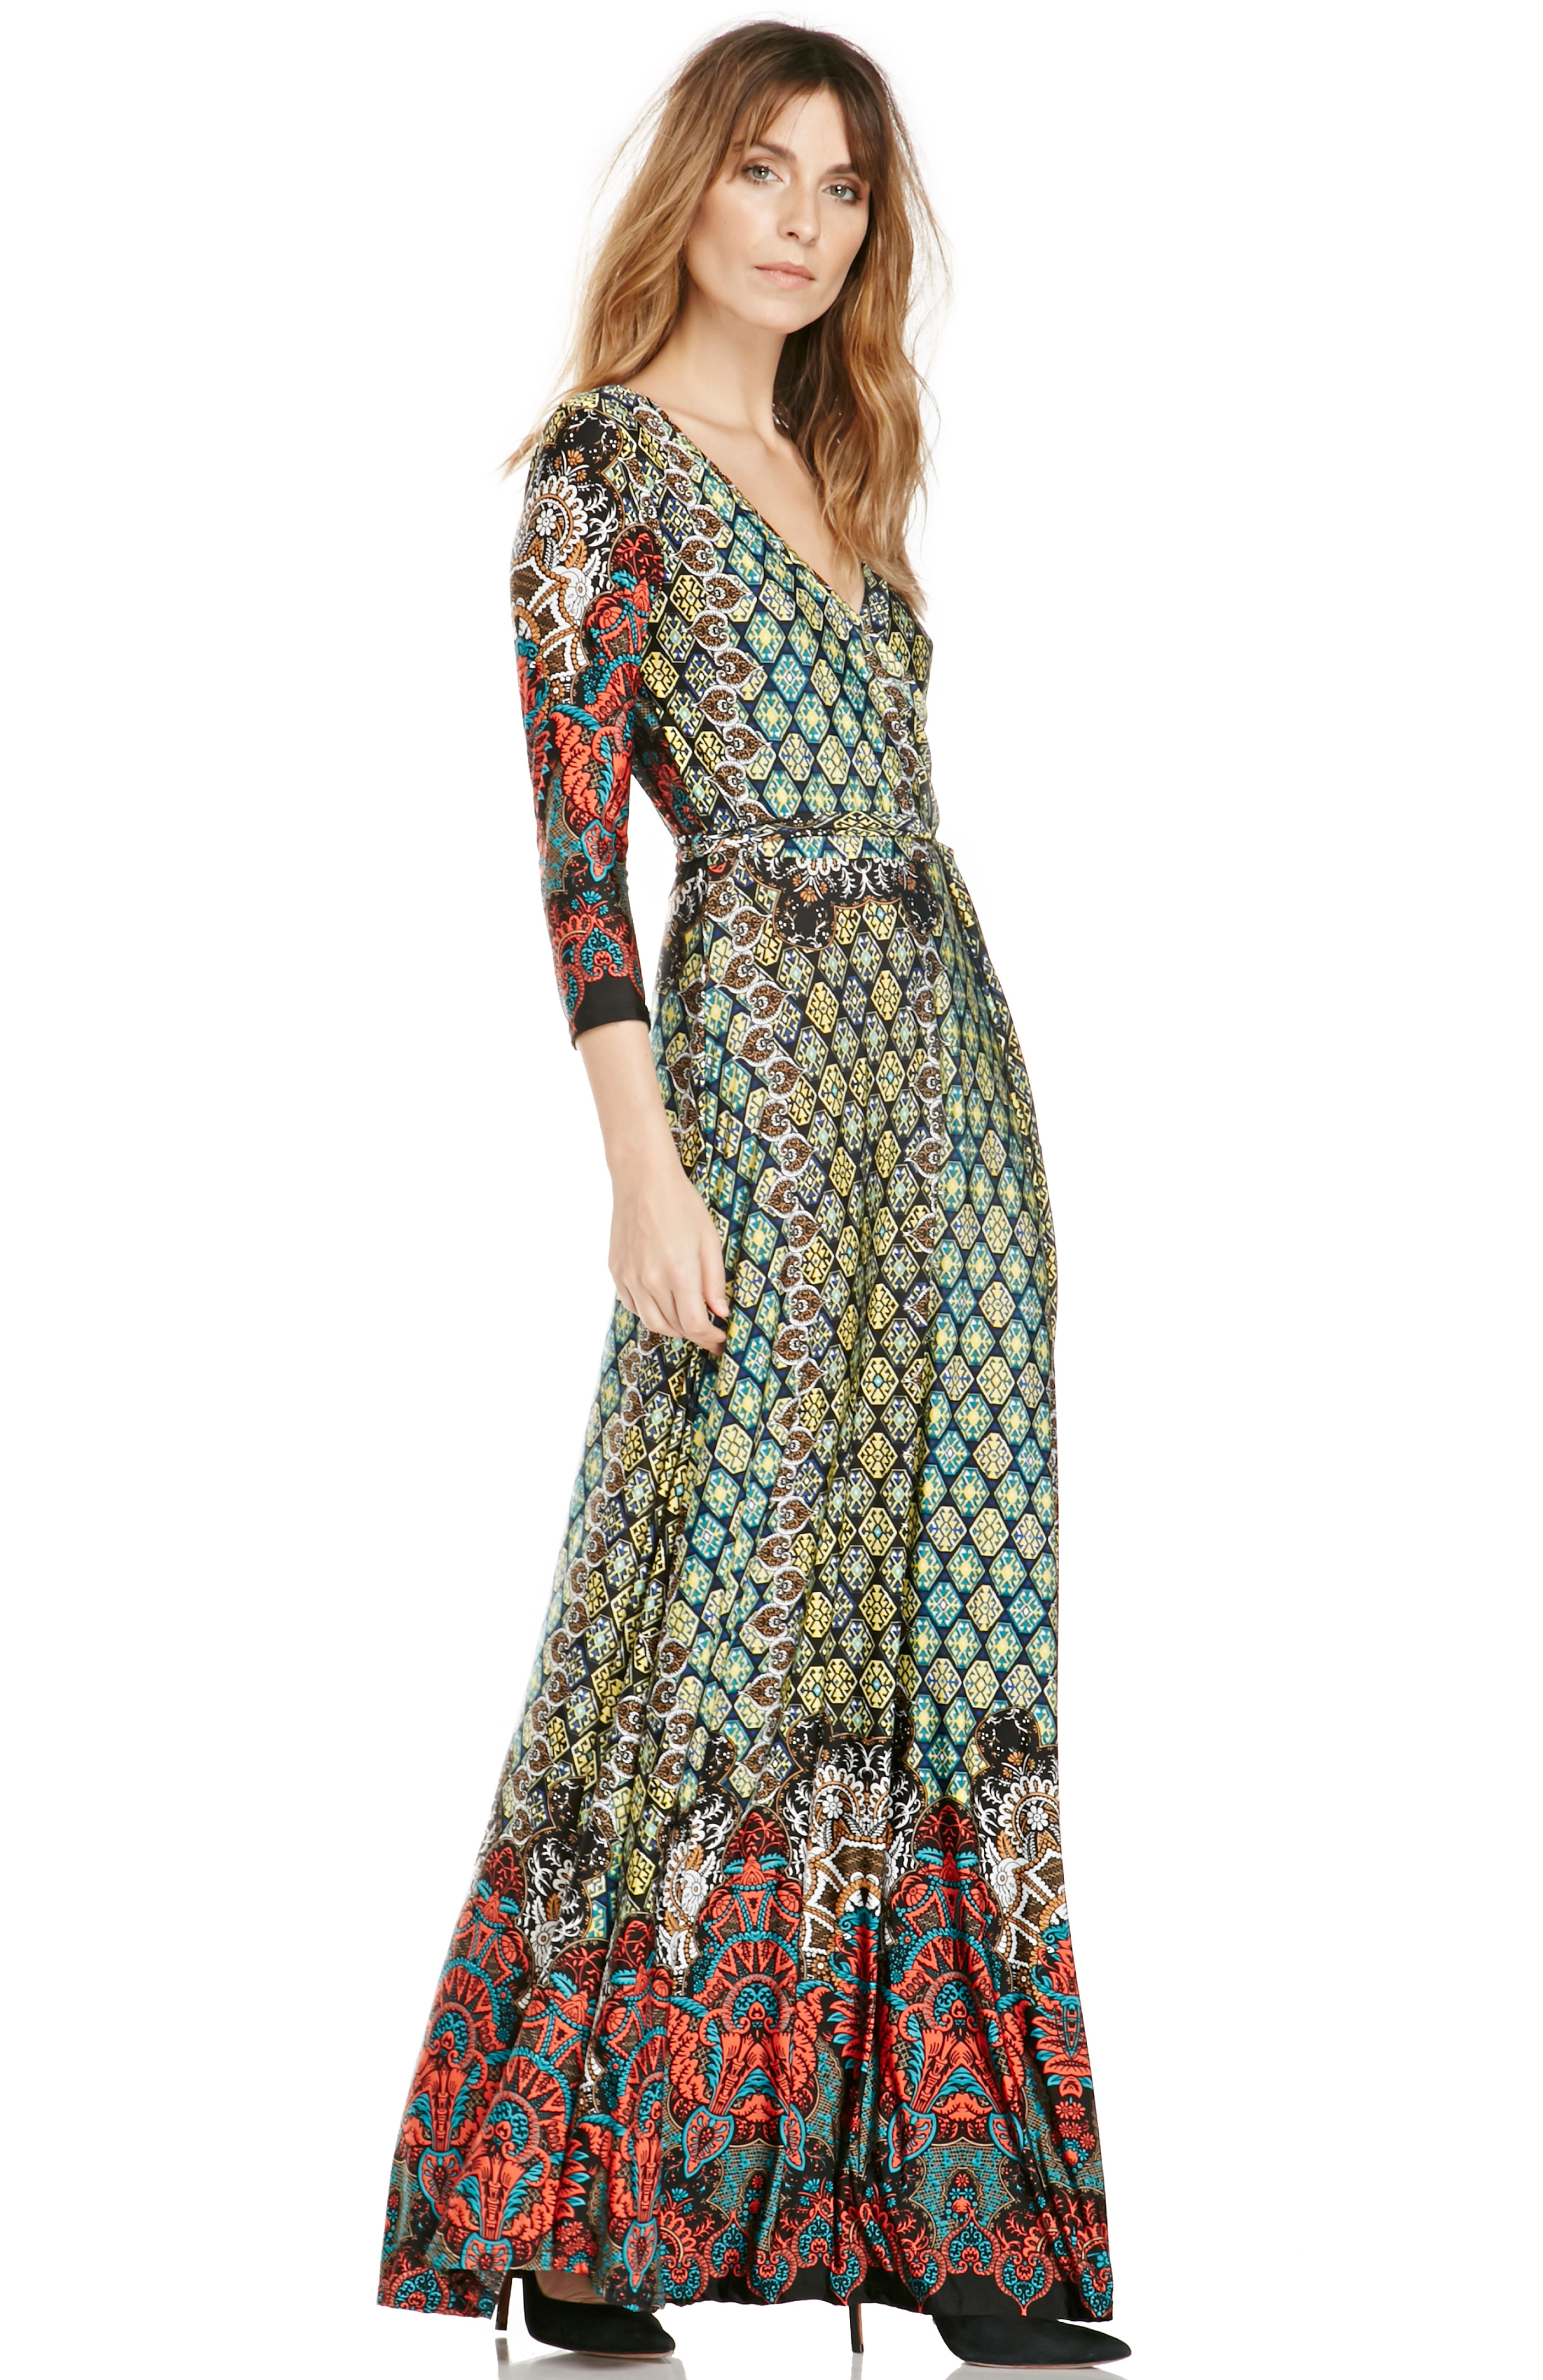 Colorful Mixed Print Maxi Dress in Floral Multi | DAILYLOOK